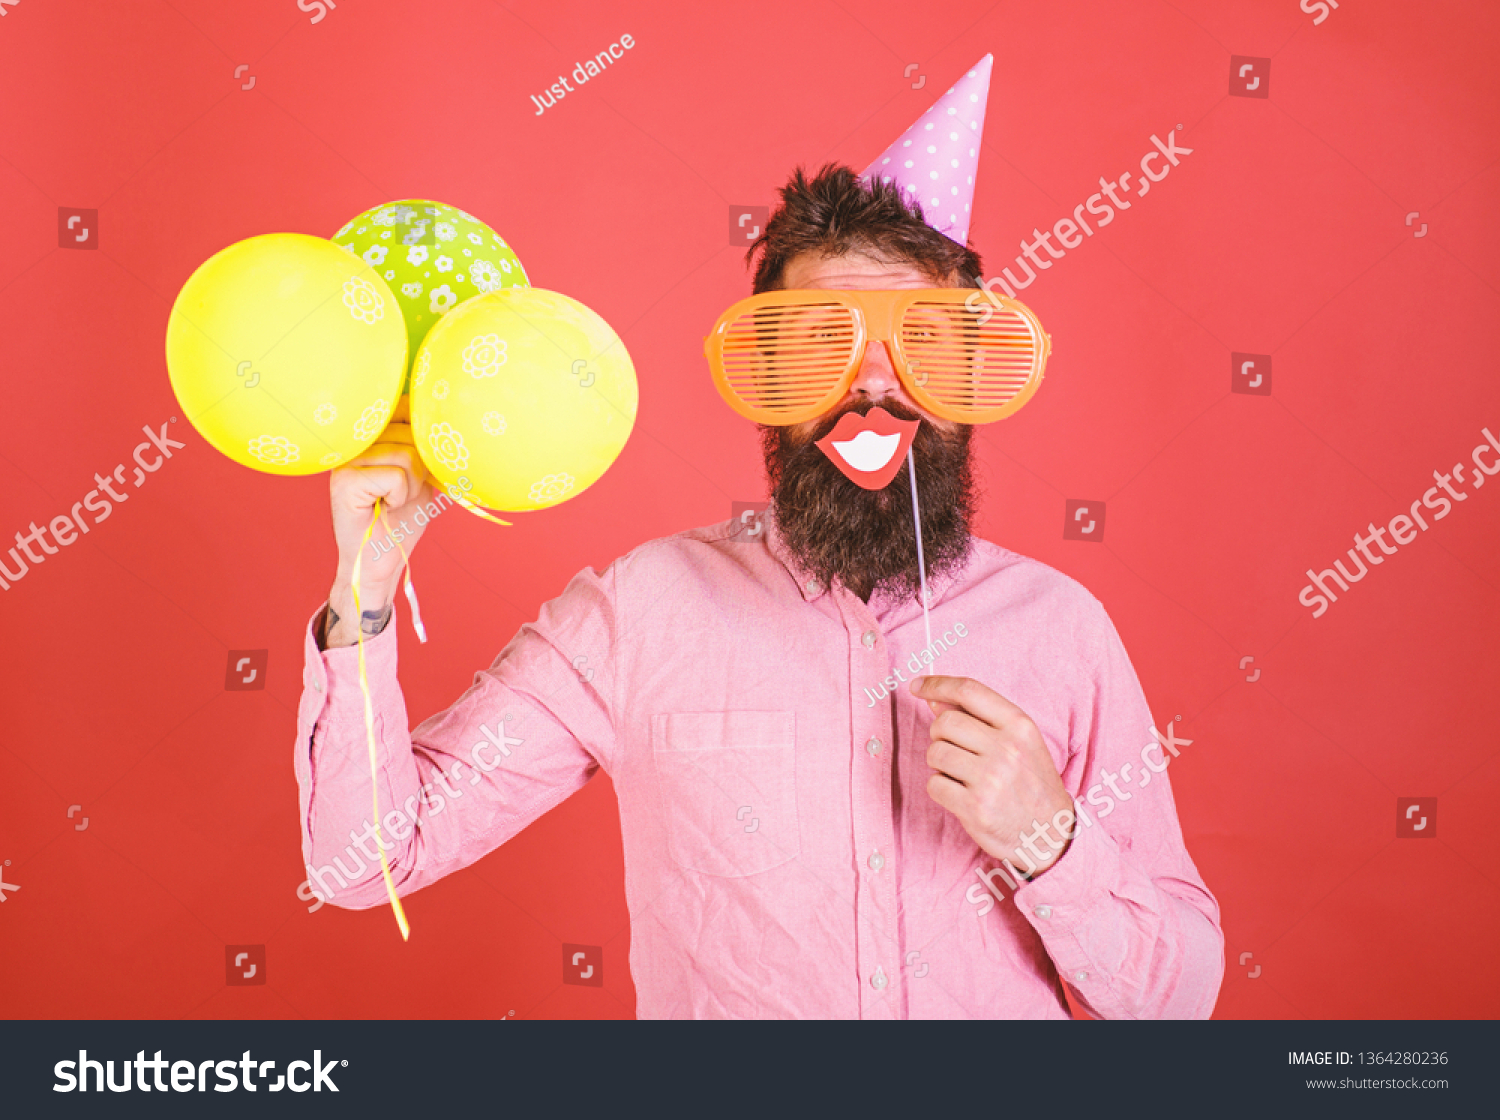 Hipster in giant sunglasses celebrating. Guy in party hat with air balloons celebrates. Man with beard on cheerful face holds smiling mouth on stick, red background. Photo booth fun concept. #1364280236